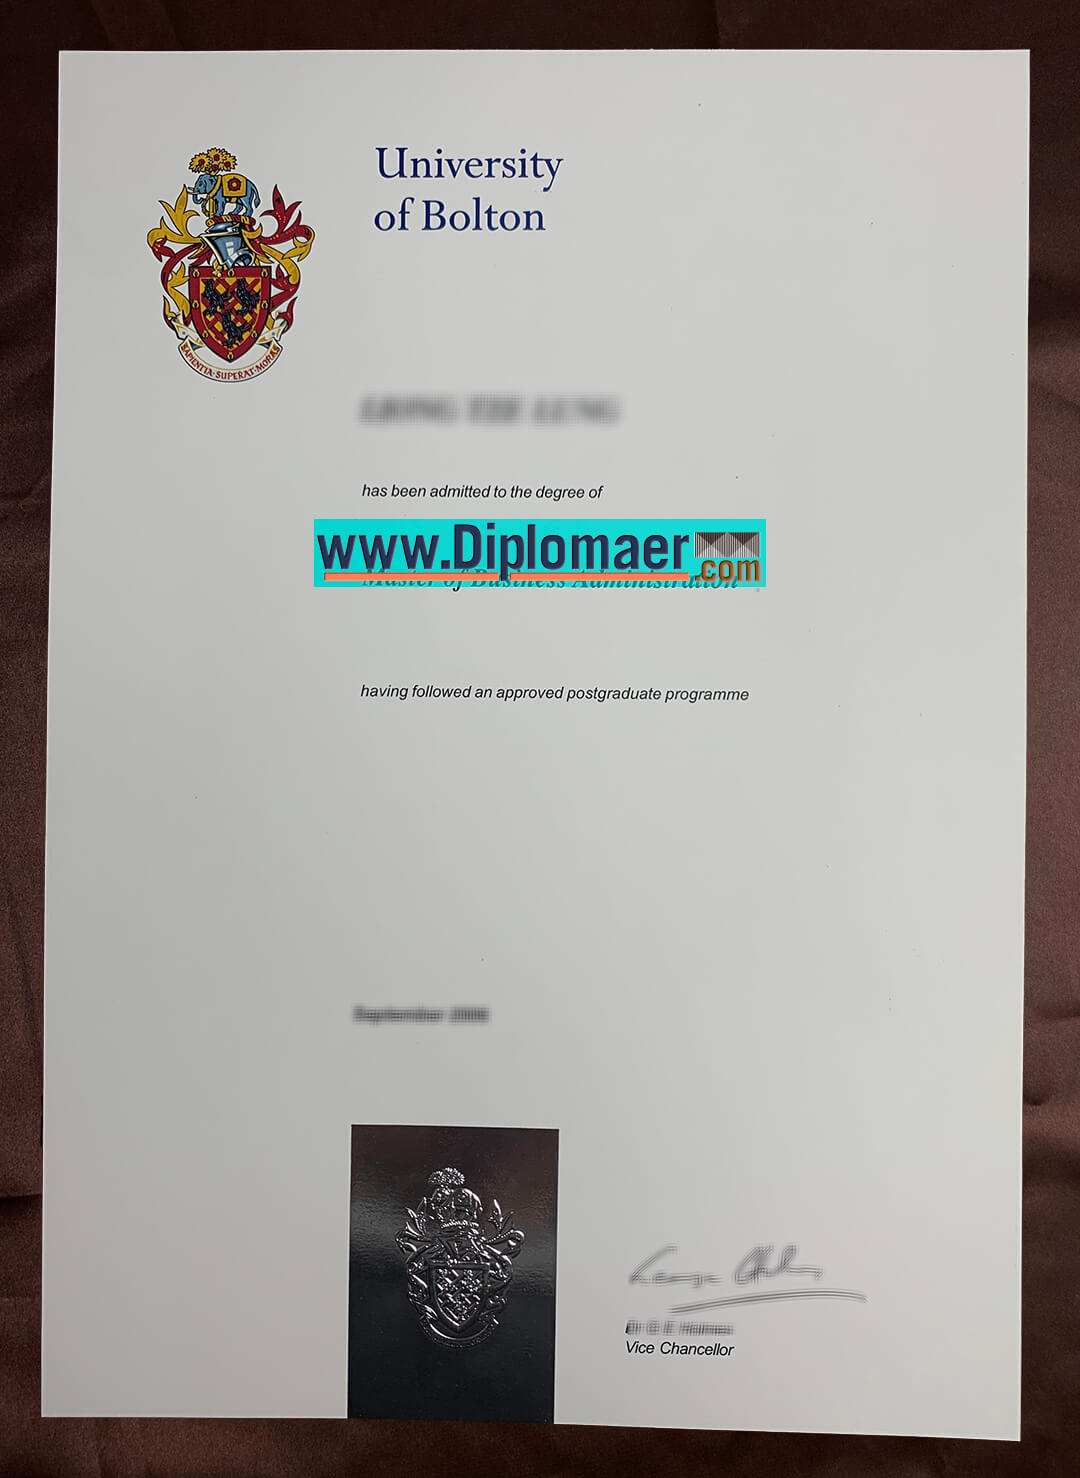 University of Bolton Fake Diploma - How to order The University of Bolton MBA Degree?